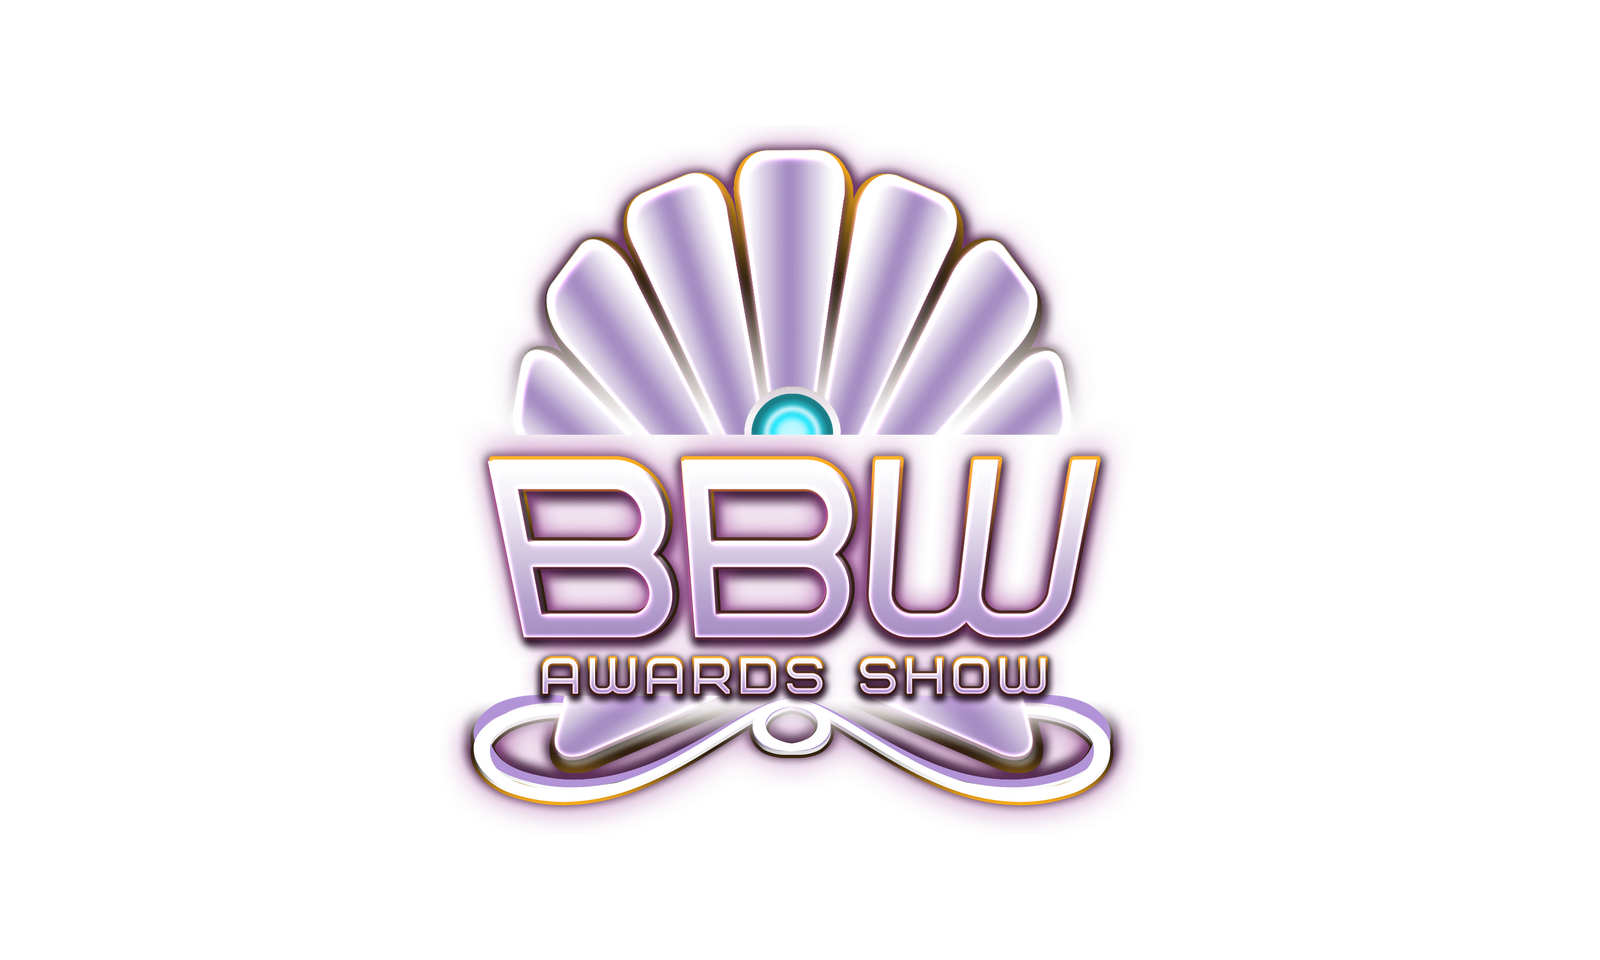 Limited VIP Tickets Available for BBW Awards Show on Tuesday